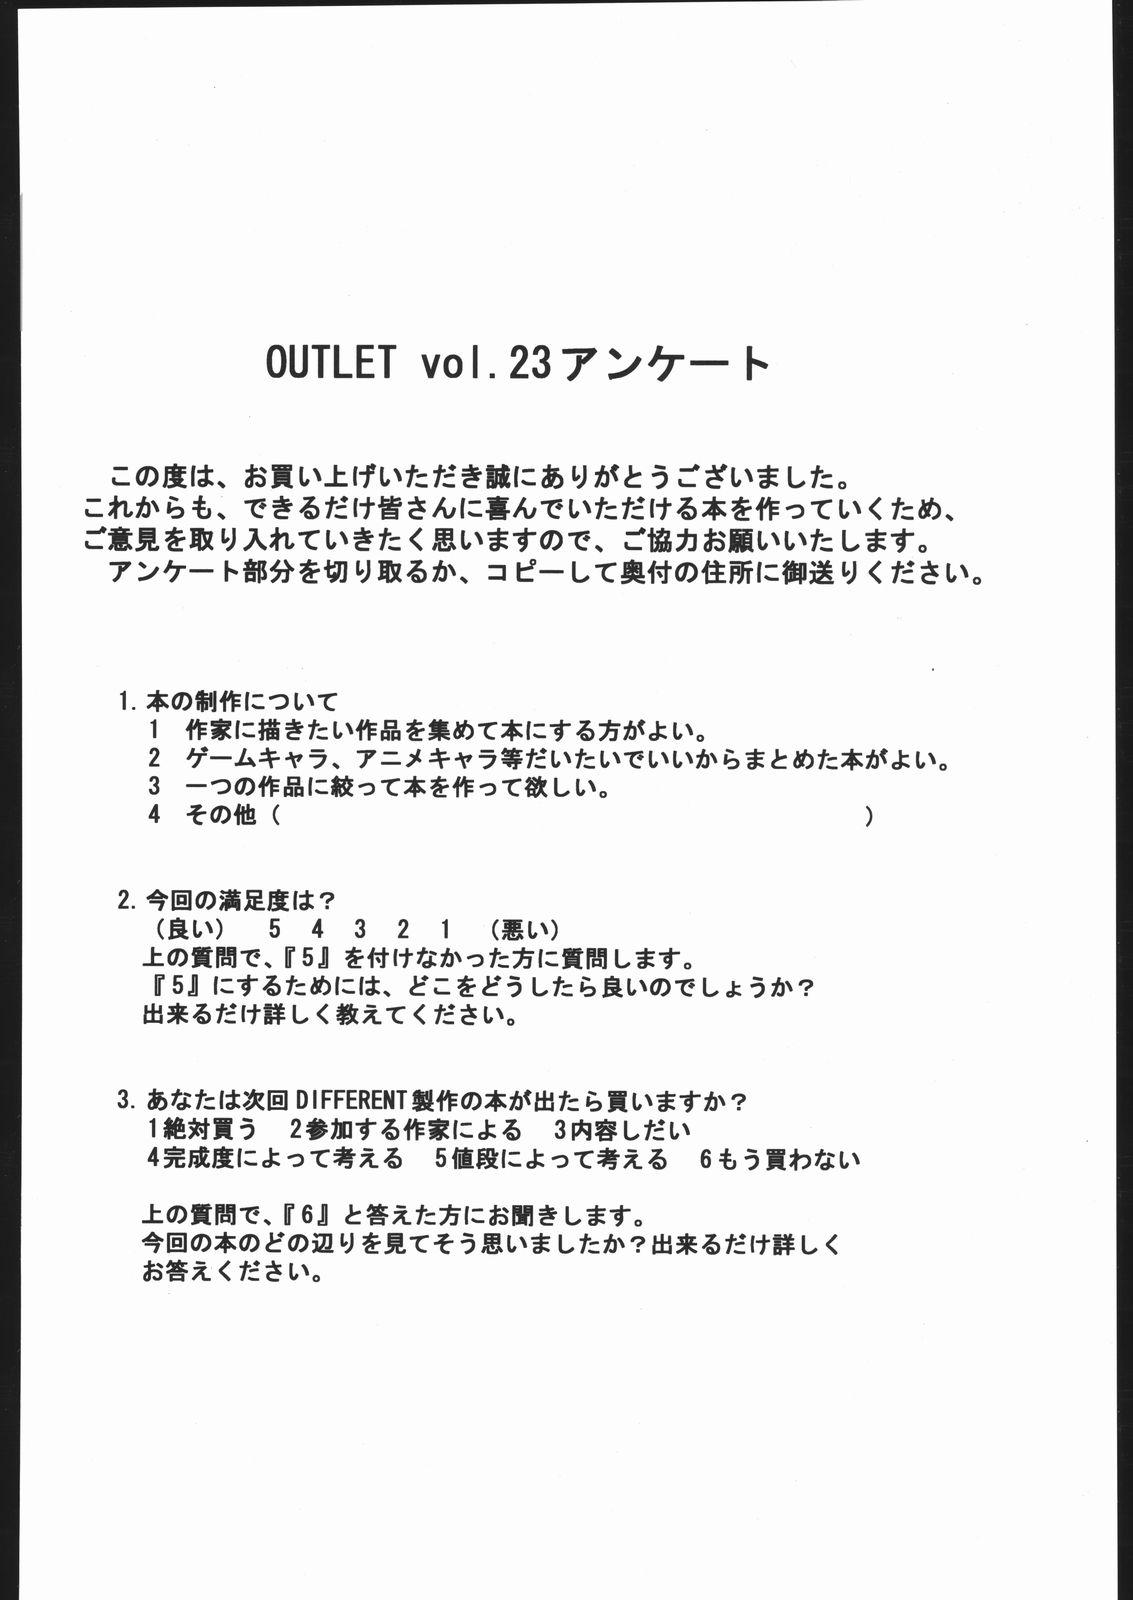 OUTLET 23 52